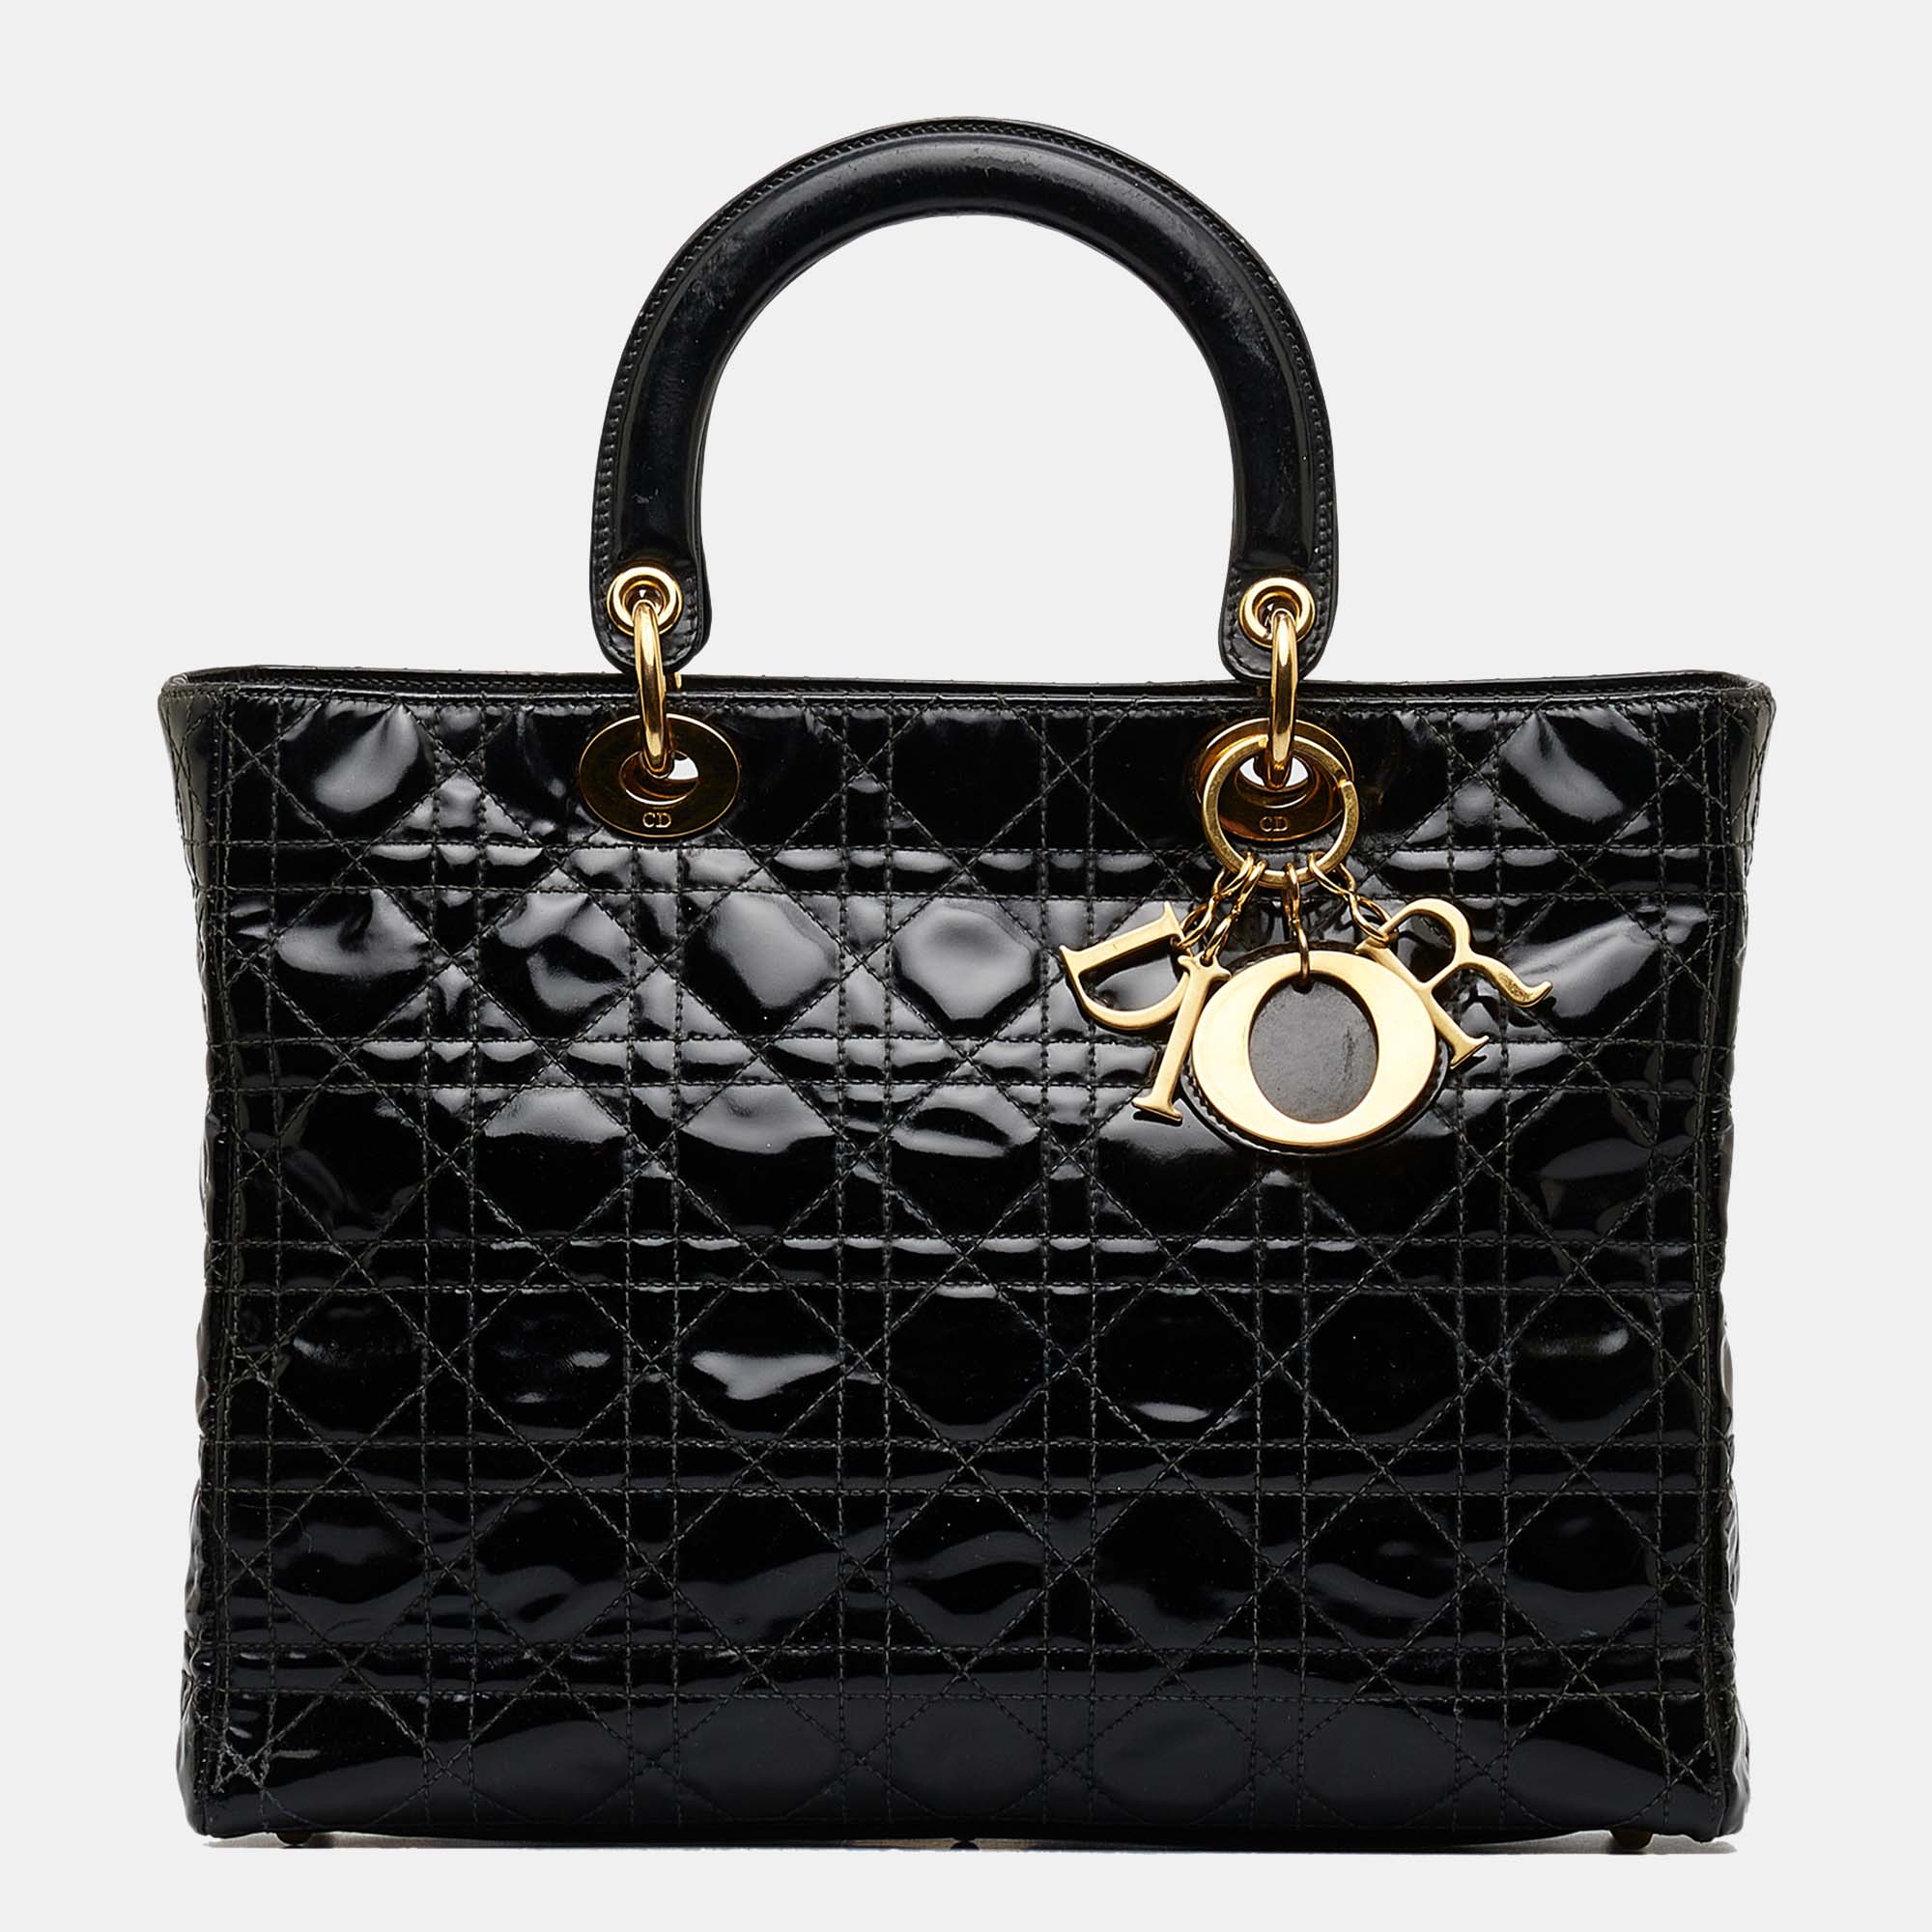 Dior Large Cannage Patent Lady